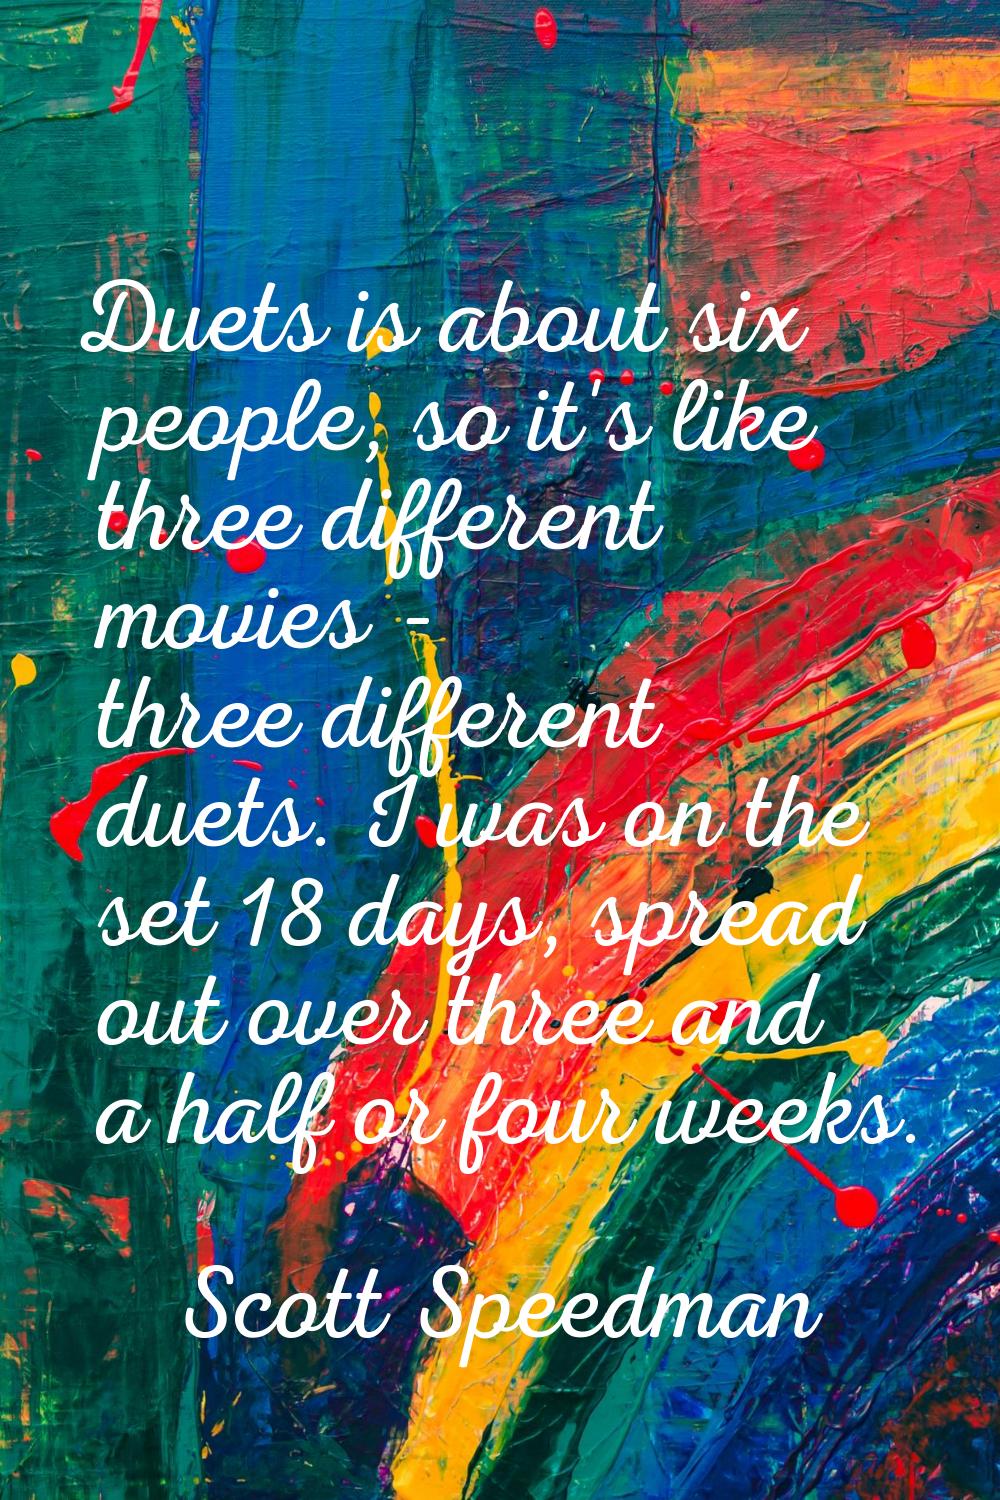 Duets is about six people, so it's like three different movies - three different duets. I was on th